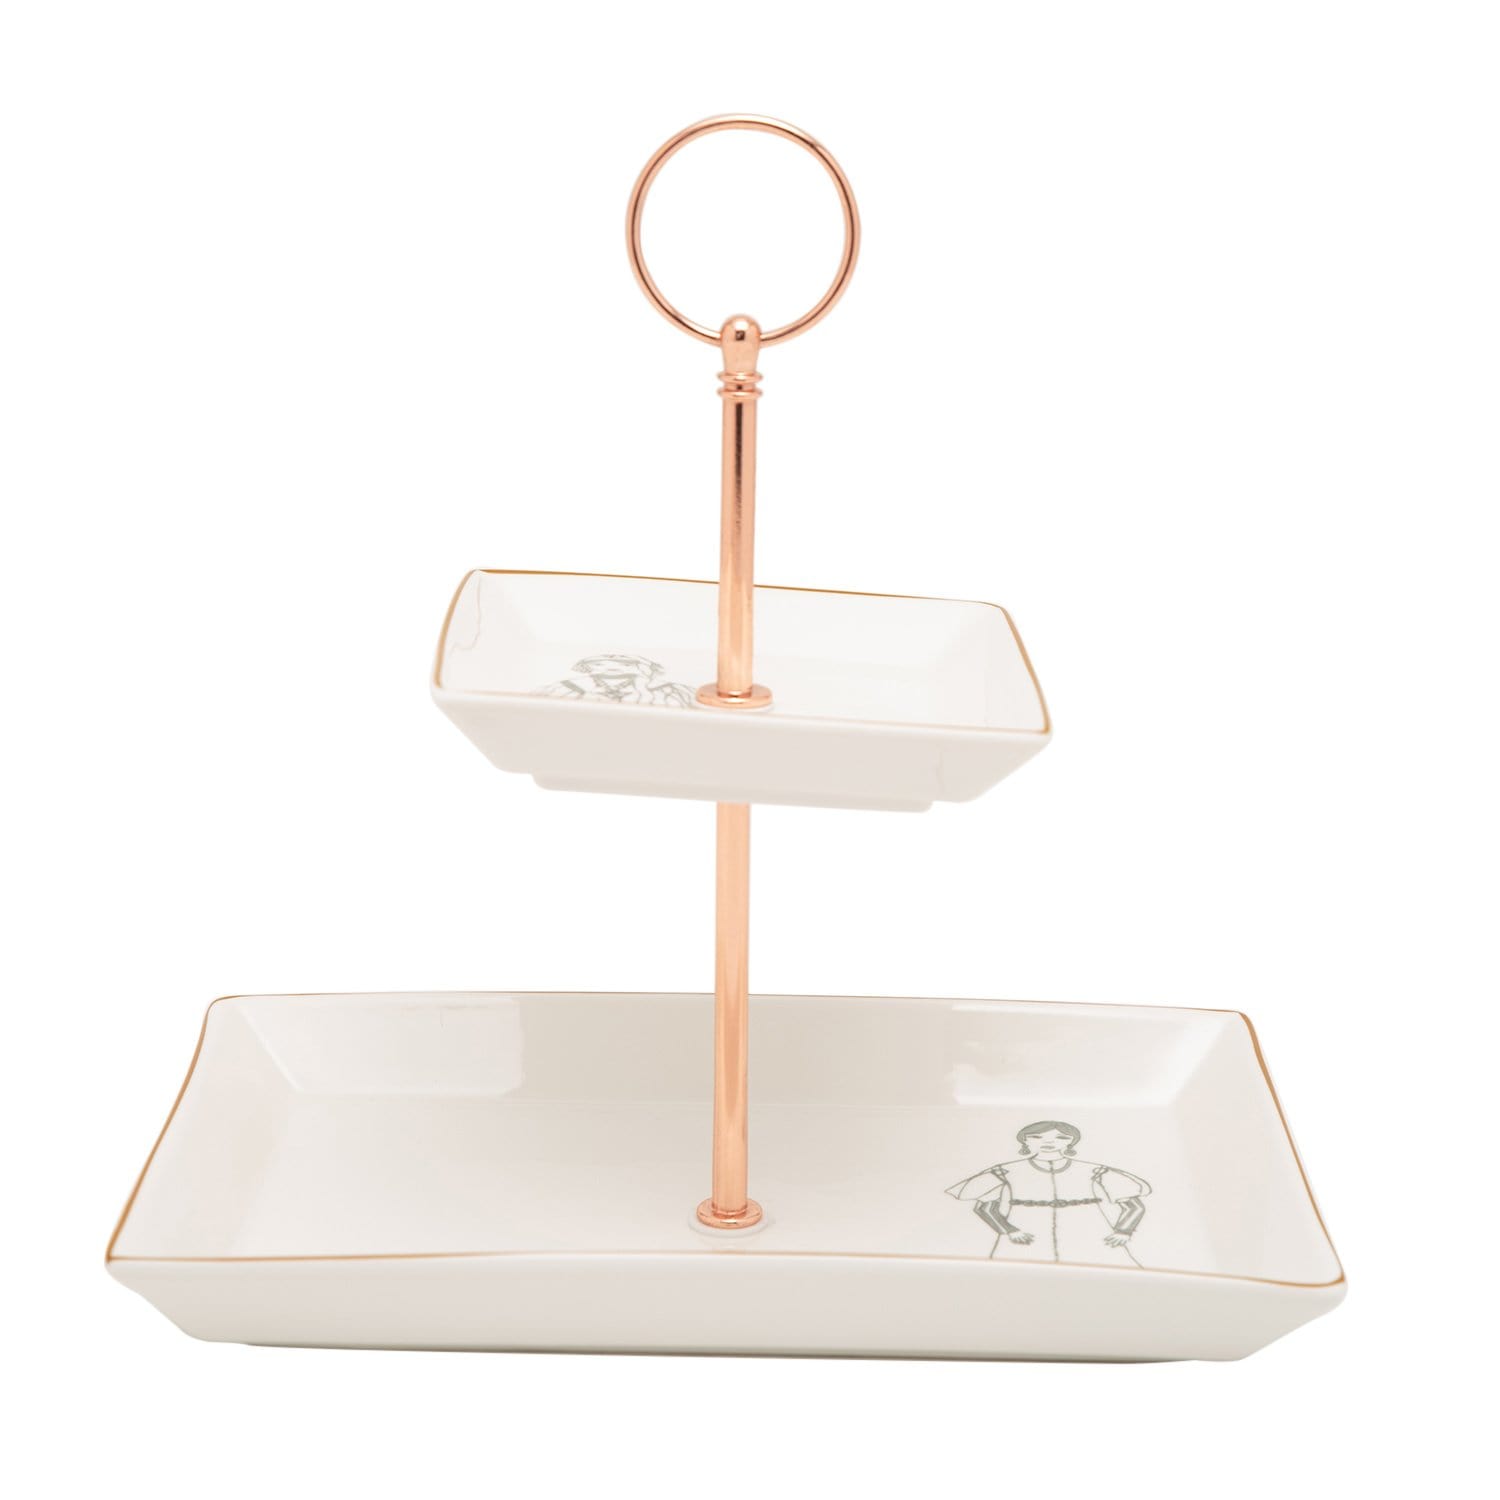 L'atelier FB Zaman 2 Levels Square Plate with Holder - TC 4712 015 - Jashanmal Home